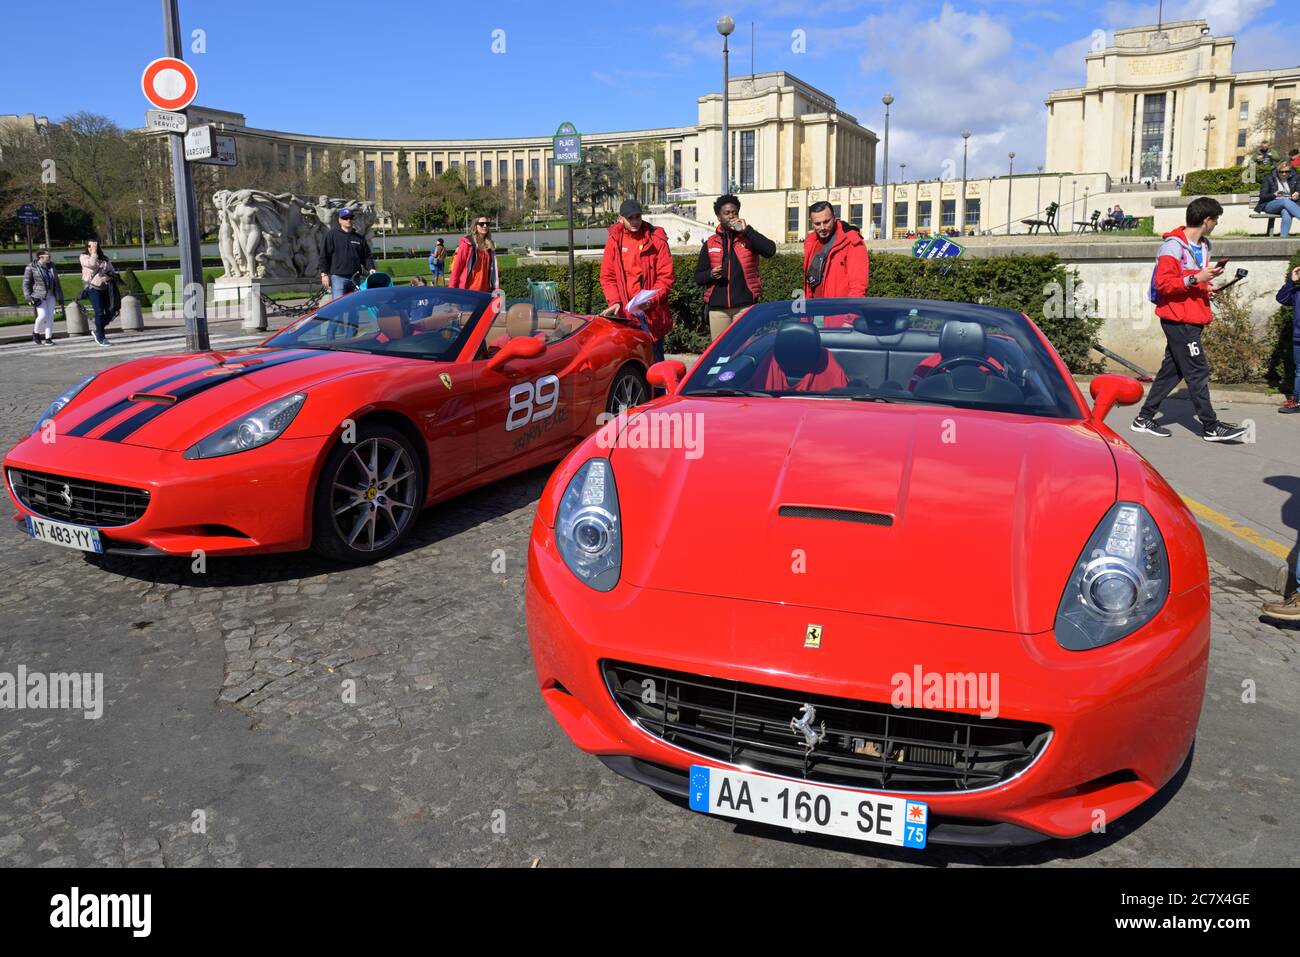 Ferrari convertibles displayed in front of the Trocadero, Paris FR Stock Photo